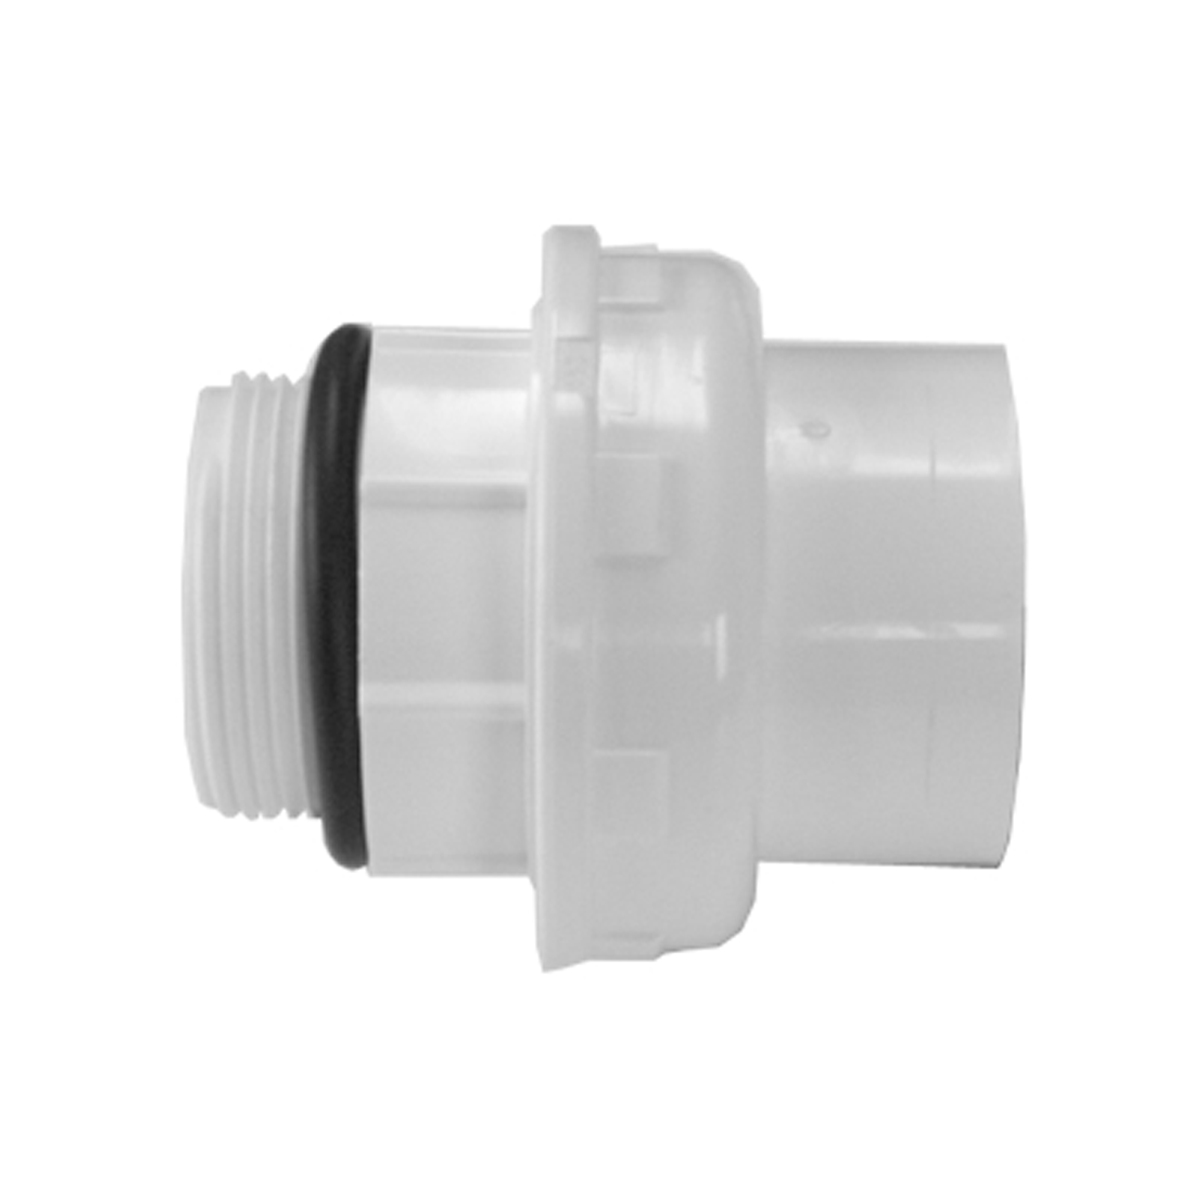 IBG® adapter union solvent socket / male thread with O-ring sealing on thread, white, PN10 d50 - 1 1/2" IBG® adapter union solvent socket / male thread with O-ring sealing on thread, white, PN10 d50 - 1 1/2"